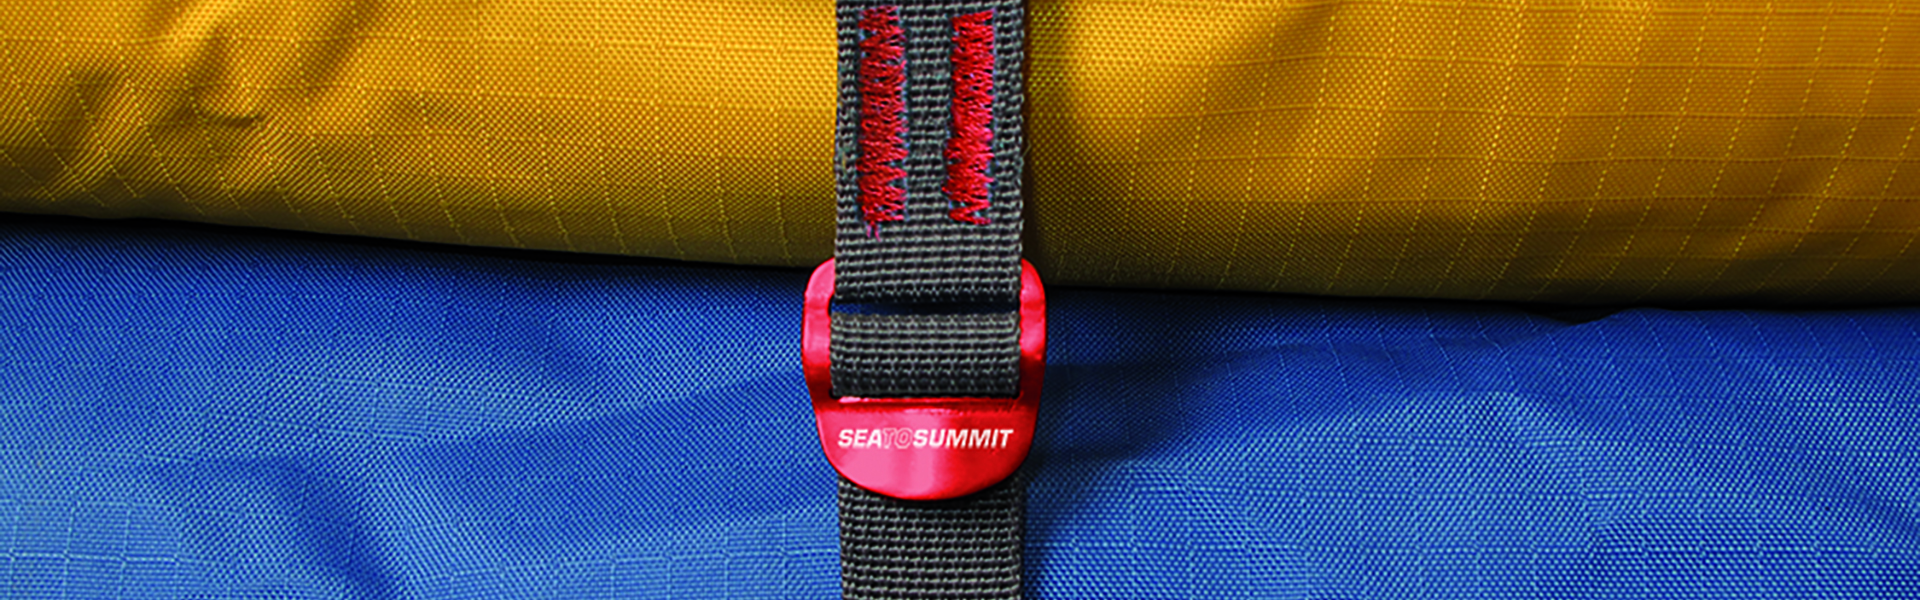 Rigging & Outfitting: Accessory Straps by Sea to Summit - Image 3335